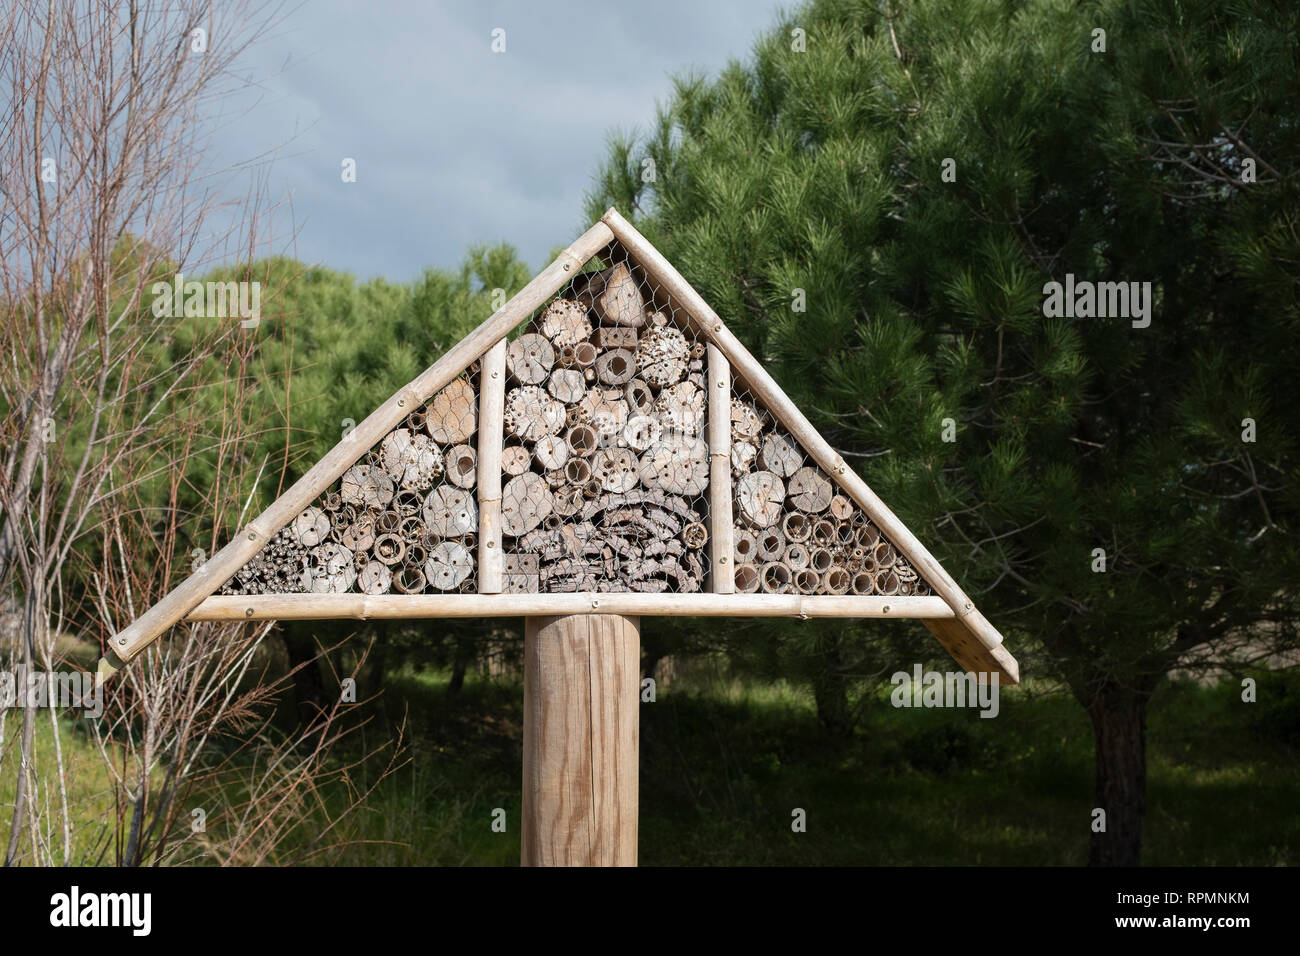 Wooden insect box to attract  local insects and bugs. Natural Areas of the Llobregat Delta. Barcelona province. Catalonia. Spain. Stock Photo